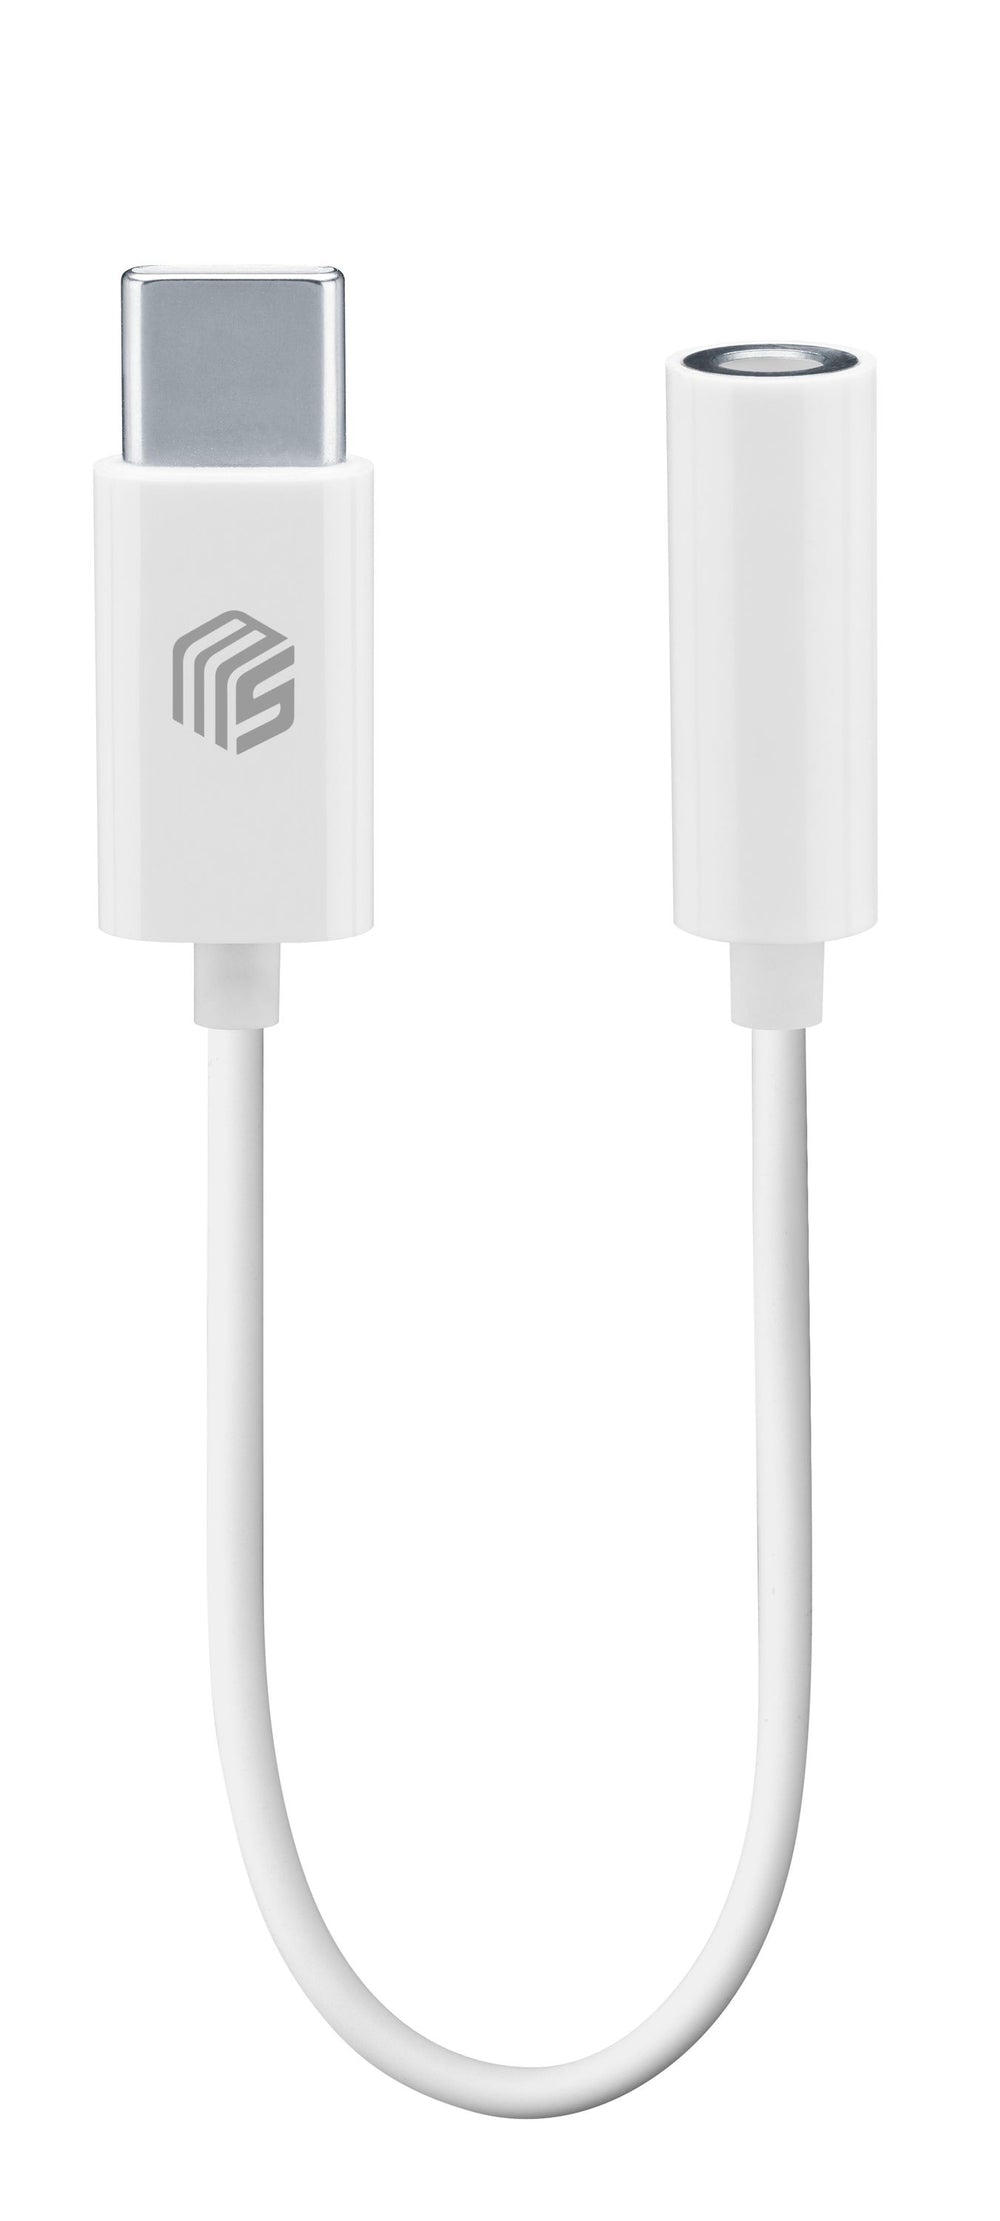 Adapter cable from Usb-c port to 3.5mm jack